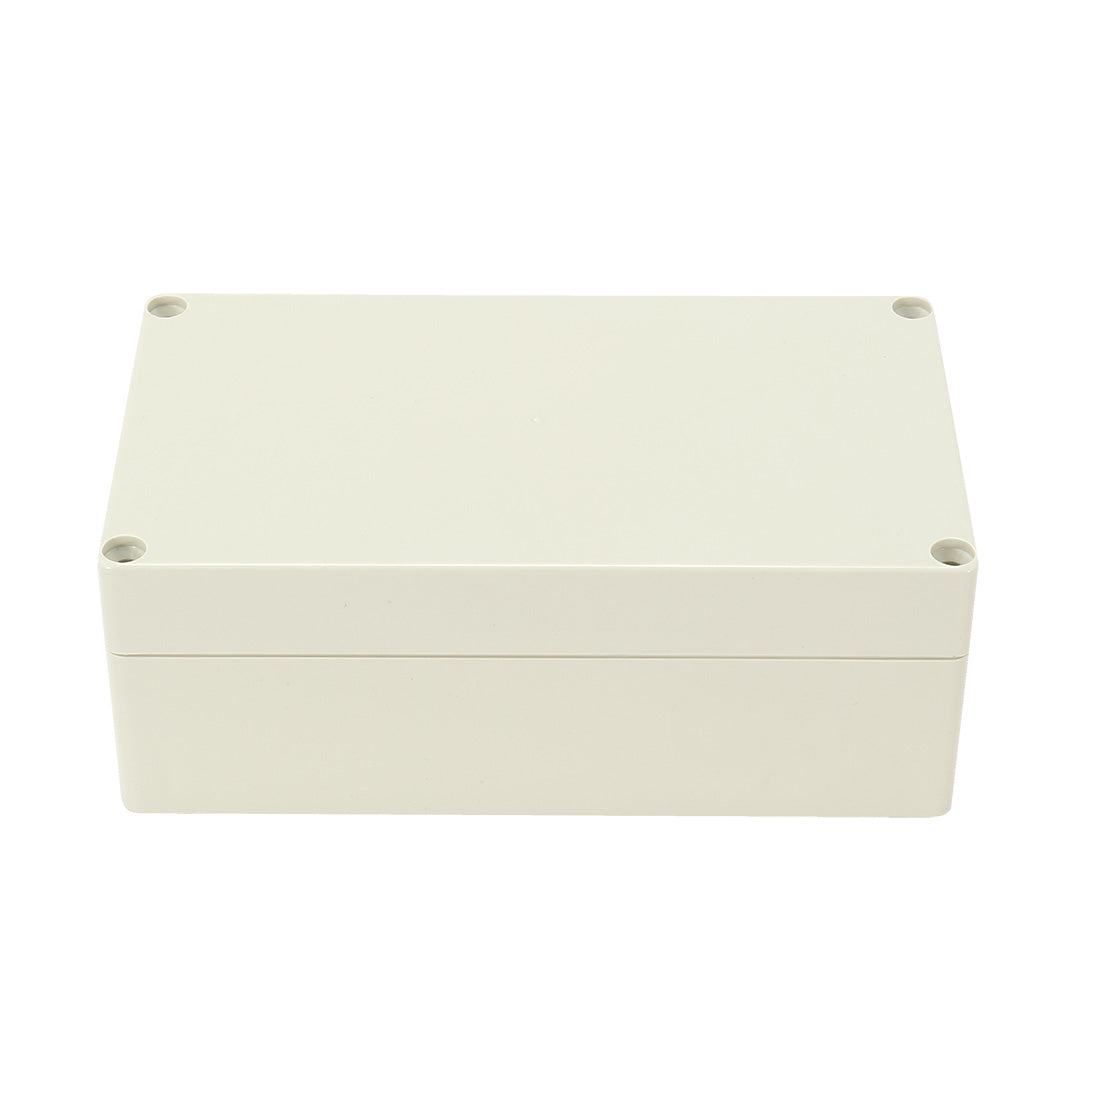 uxcell Uxcell 158mmx90mmx60mm ABS Junction Box Universal Electric Project Enclosure IP65